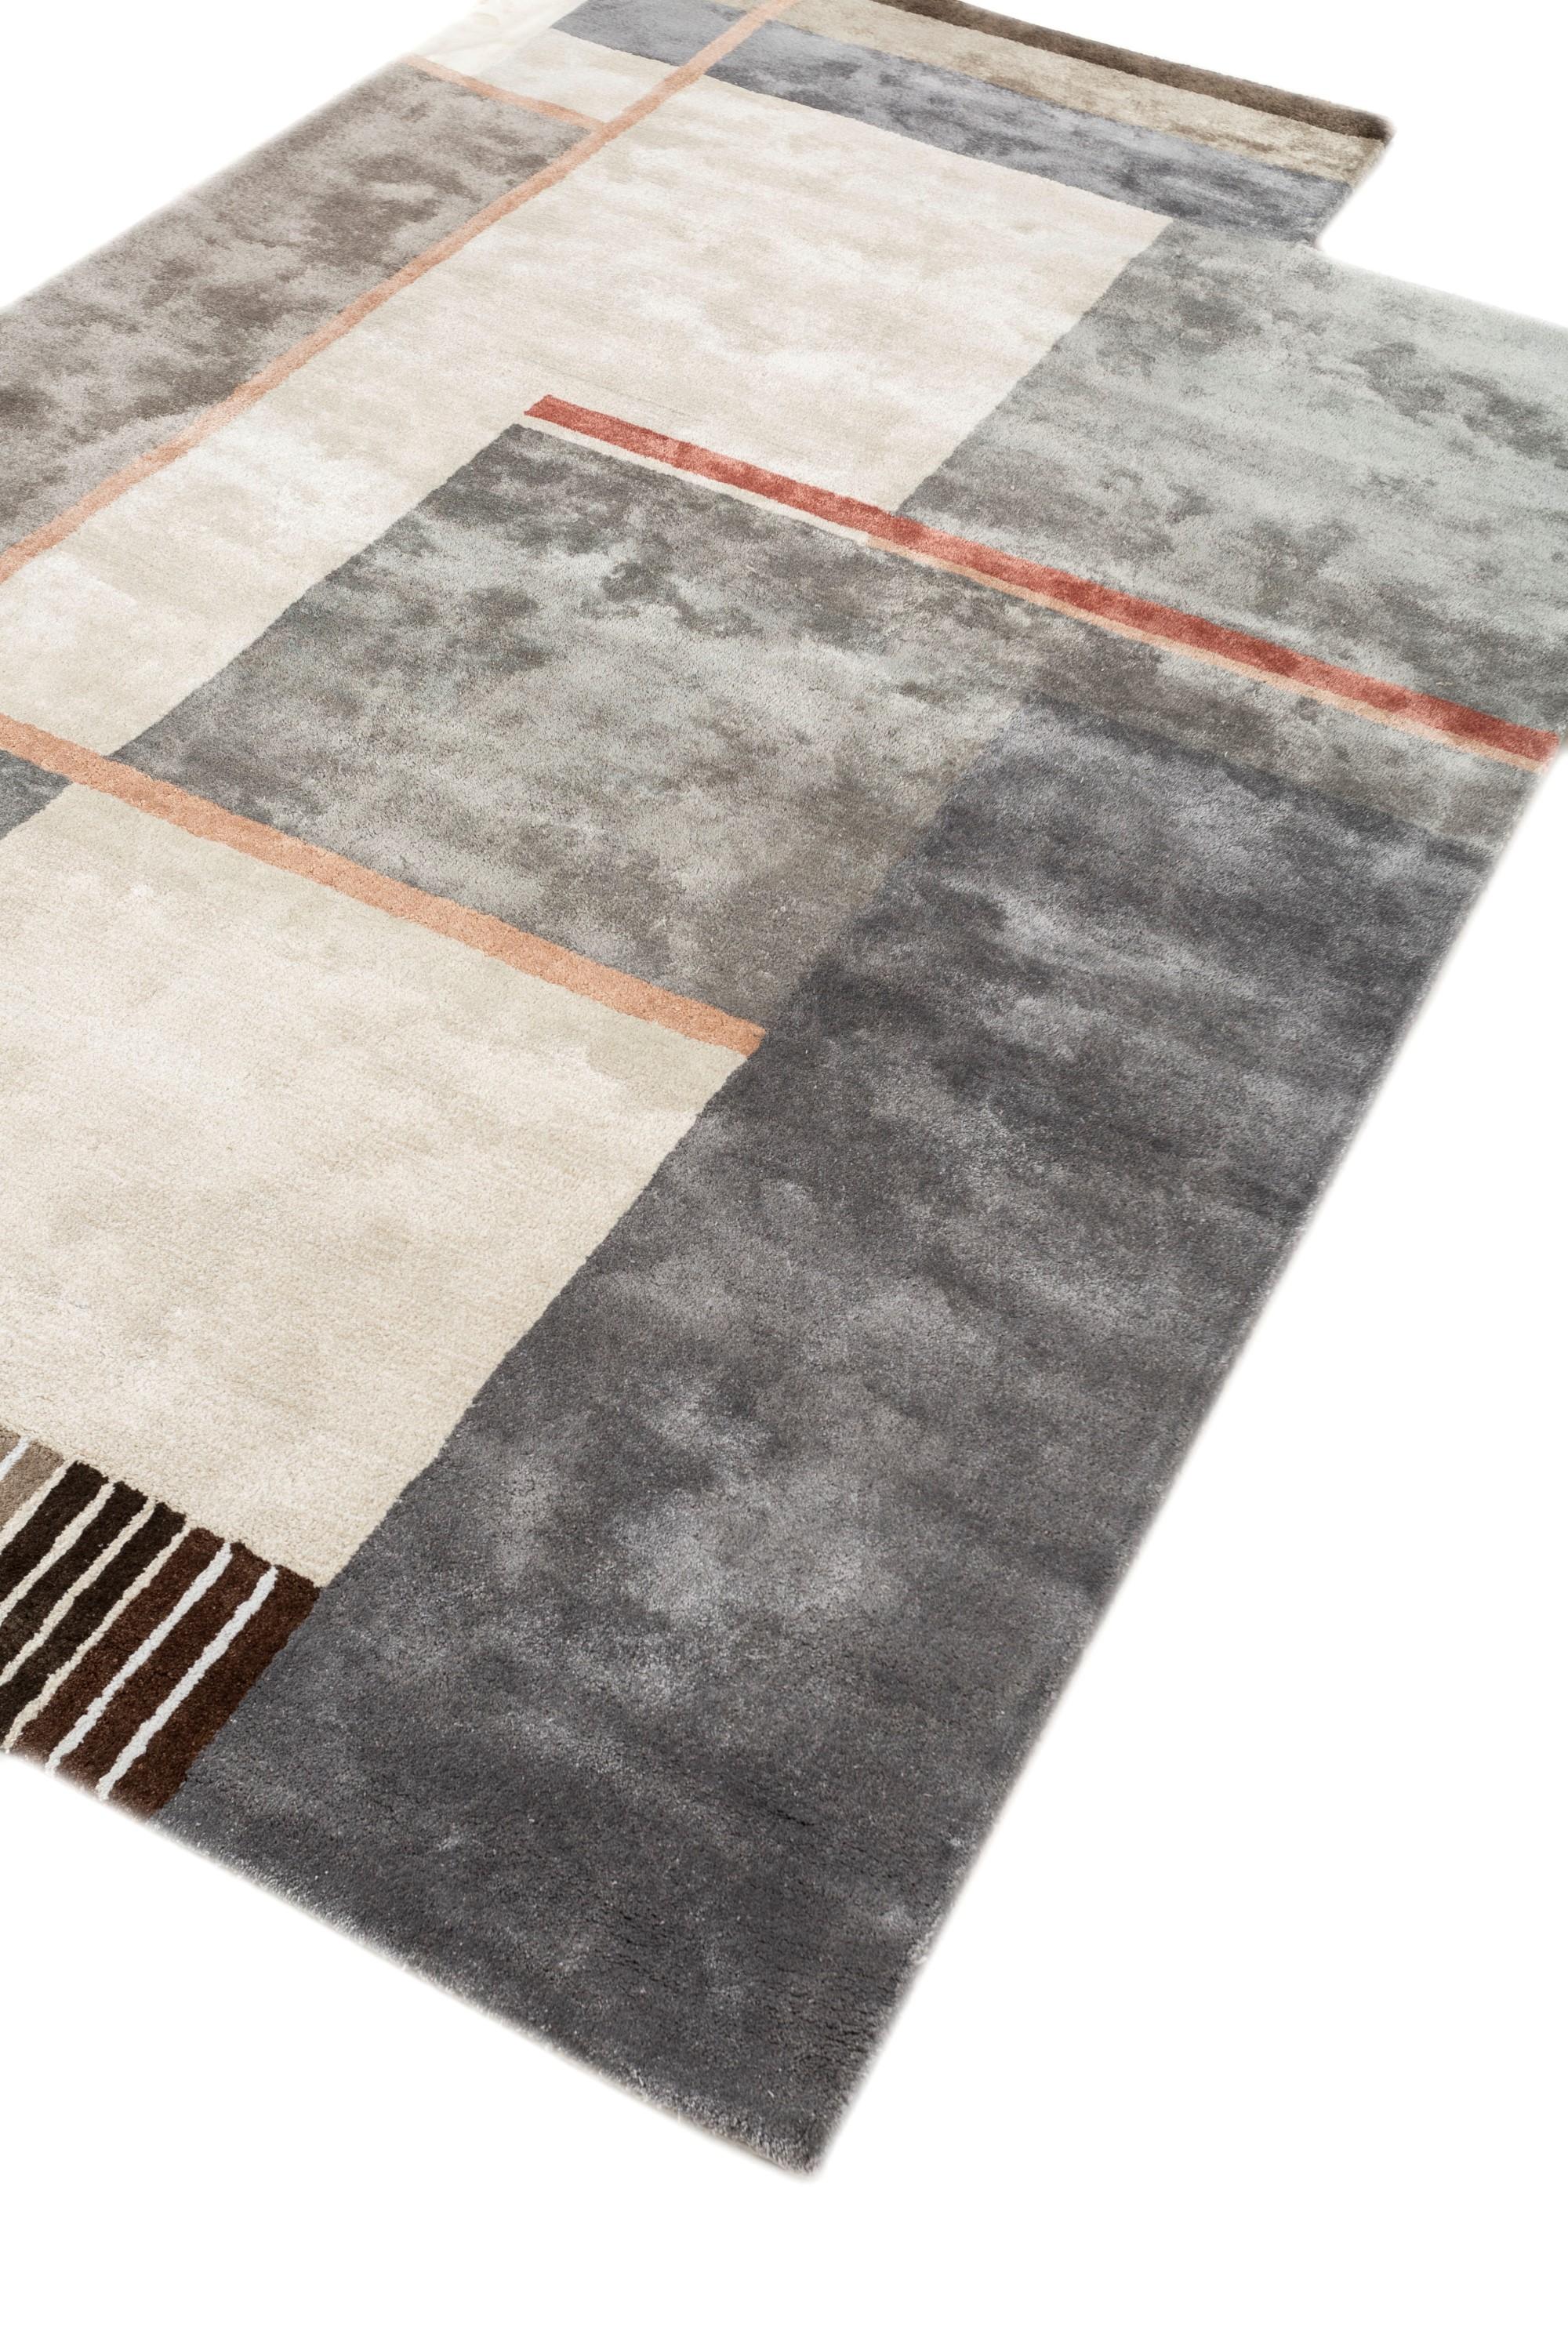 What if a rug could speak volumes through its shapes? Enter this modern marvel, hand-tufted with precision in rural India. Inspired by the profound symbolism of different forms, each woven element carries its own narrative. Crafted from a blend of